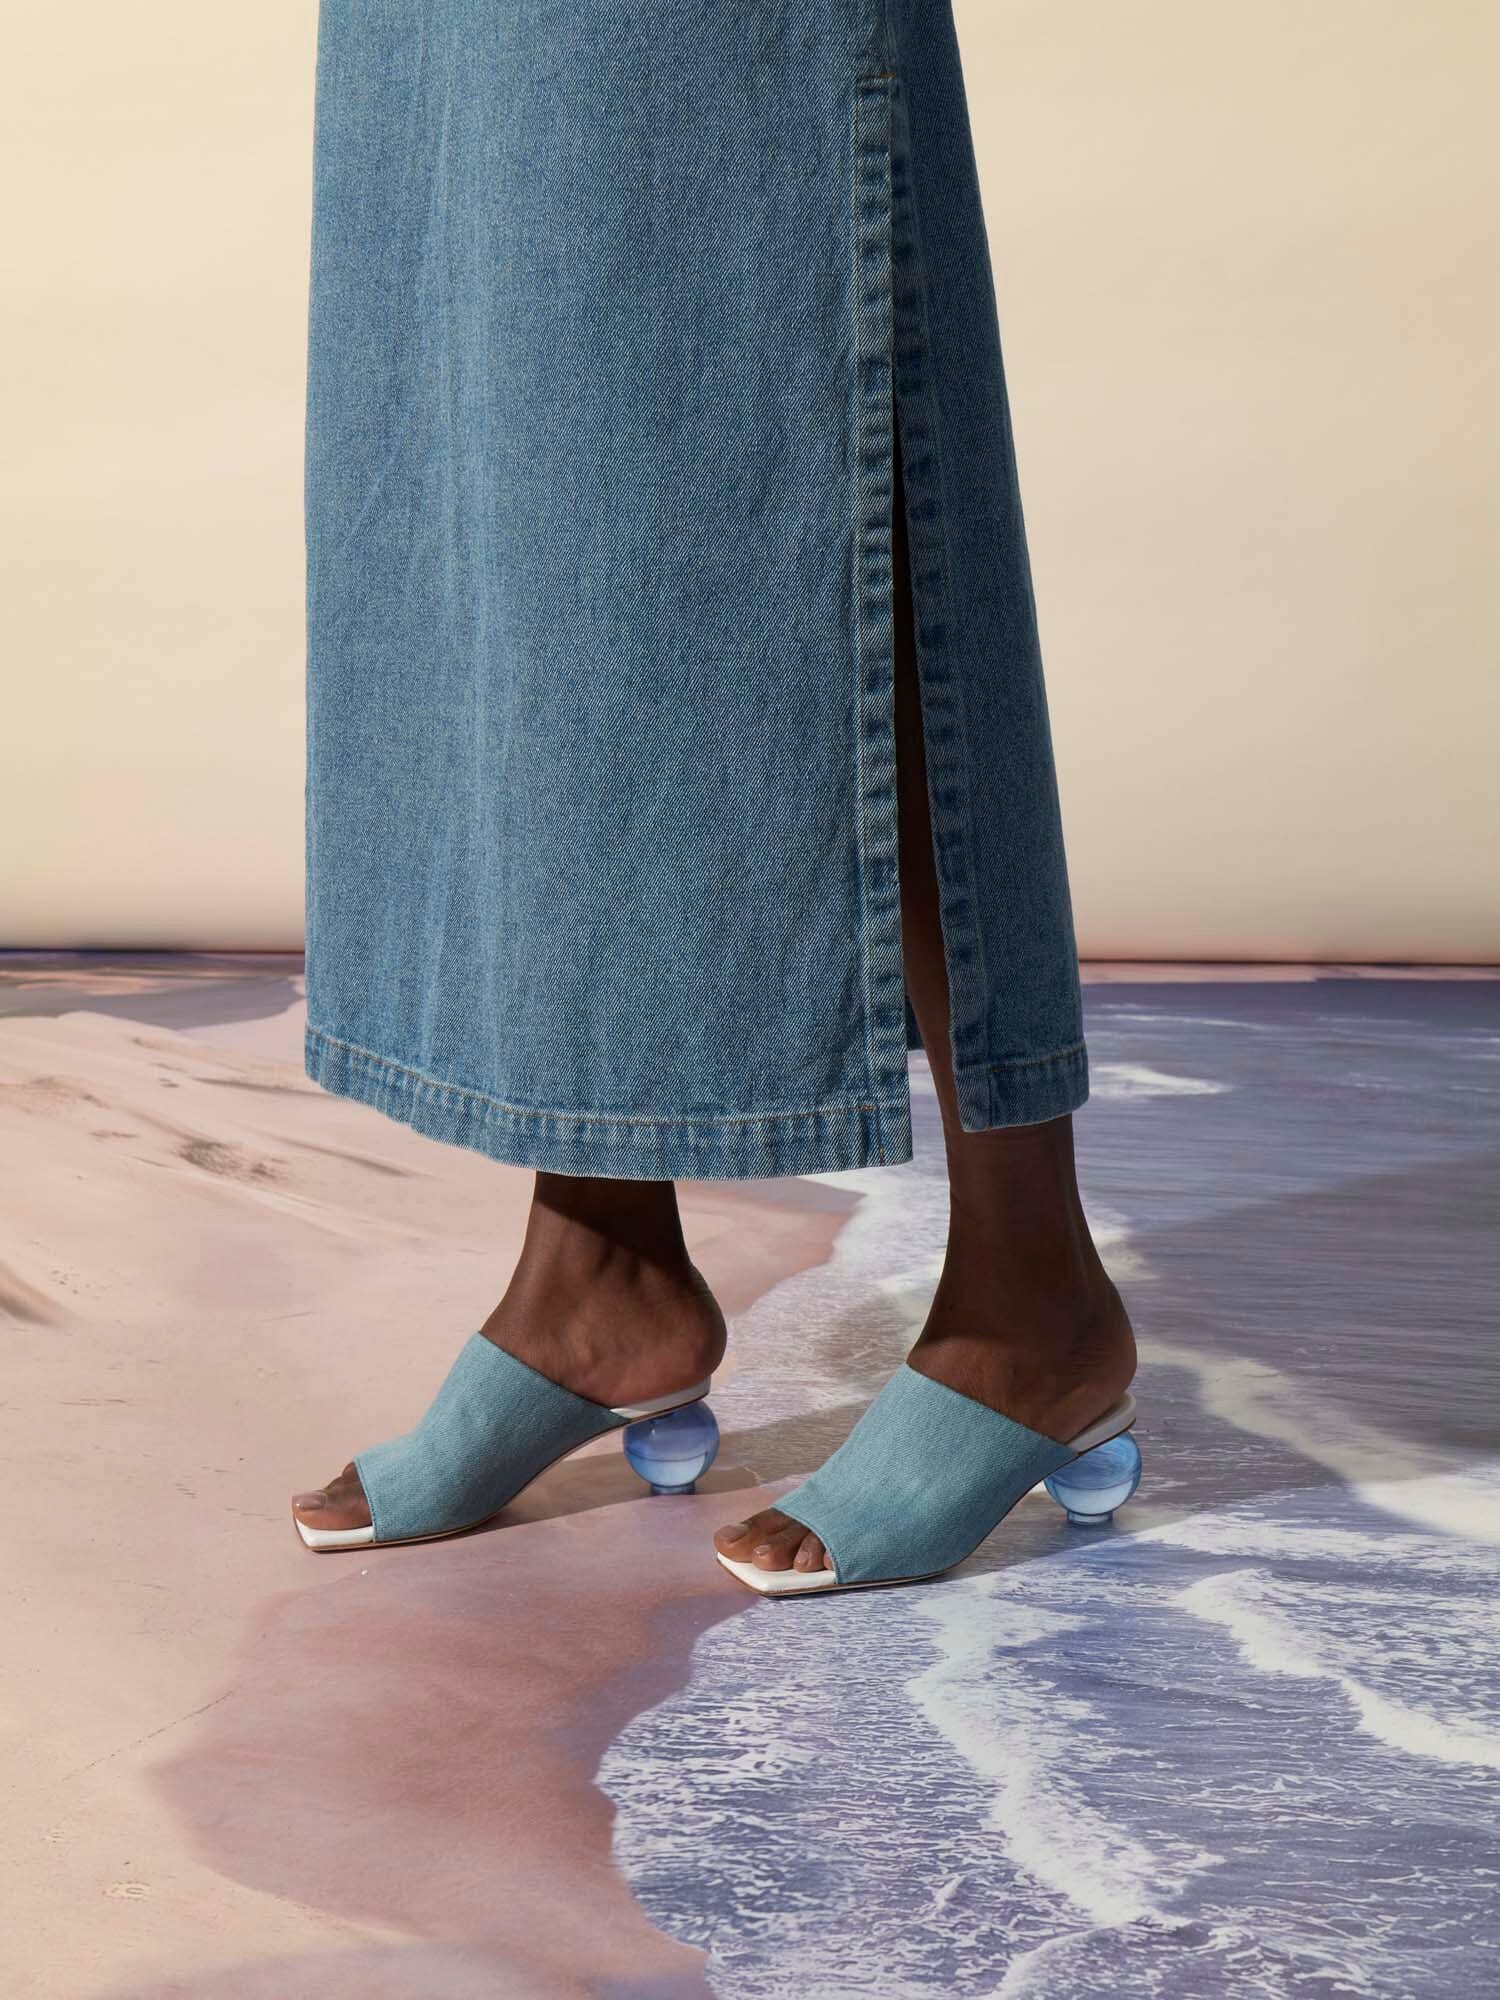 PAROS - Plexiglas mules with spherical heels and wide strap in faded denim Blue Shoes Fête Impériale